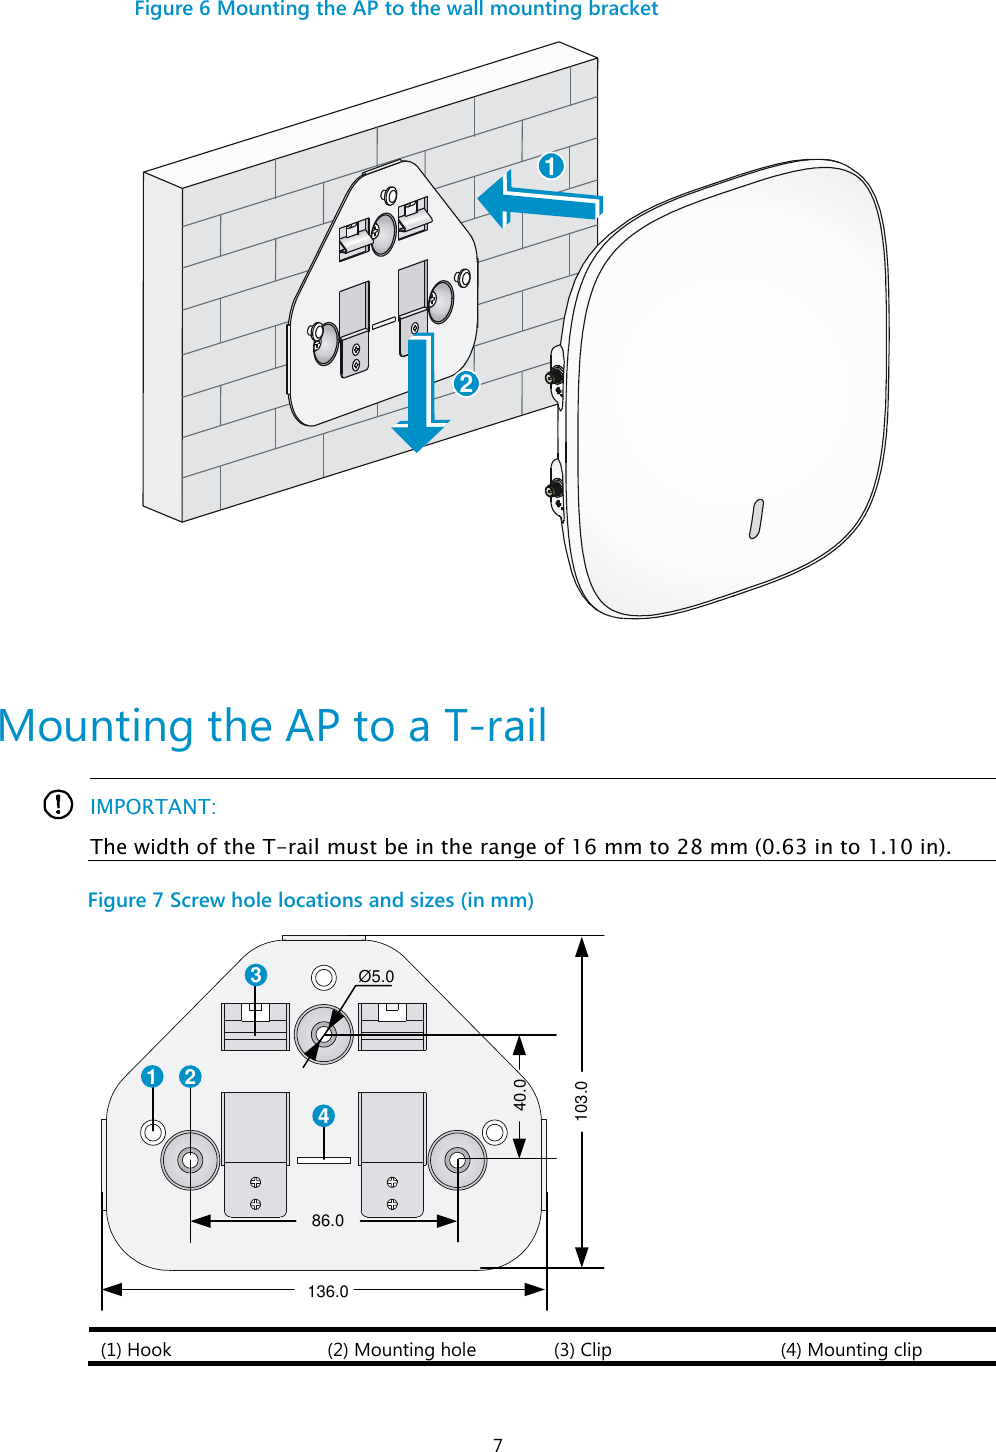  7 Figure 6 Mounting the AP to the wall mounting bracket   Mounting the AP to a T-rail  IMPORTANT: The width of the T-rail must be in the range of 16 mm to 28 mm (0.63 in to 1.10 in).  Figure 7 Screw hole locations and sizes (in mm)  (1) Hook (2) Mounting hole (3) Clip (4) Mounting clip  121 234Ø5.040.0103.086.0136.0